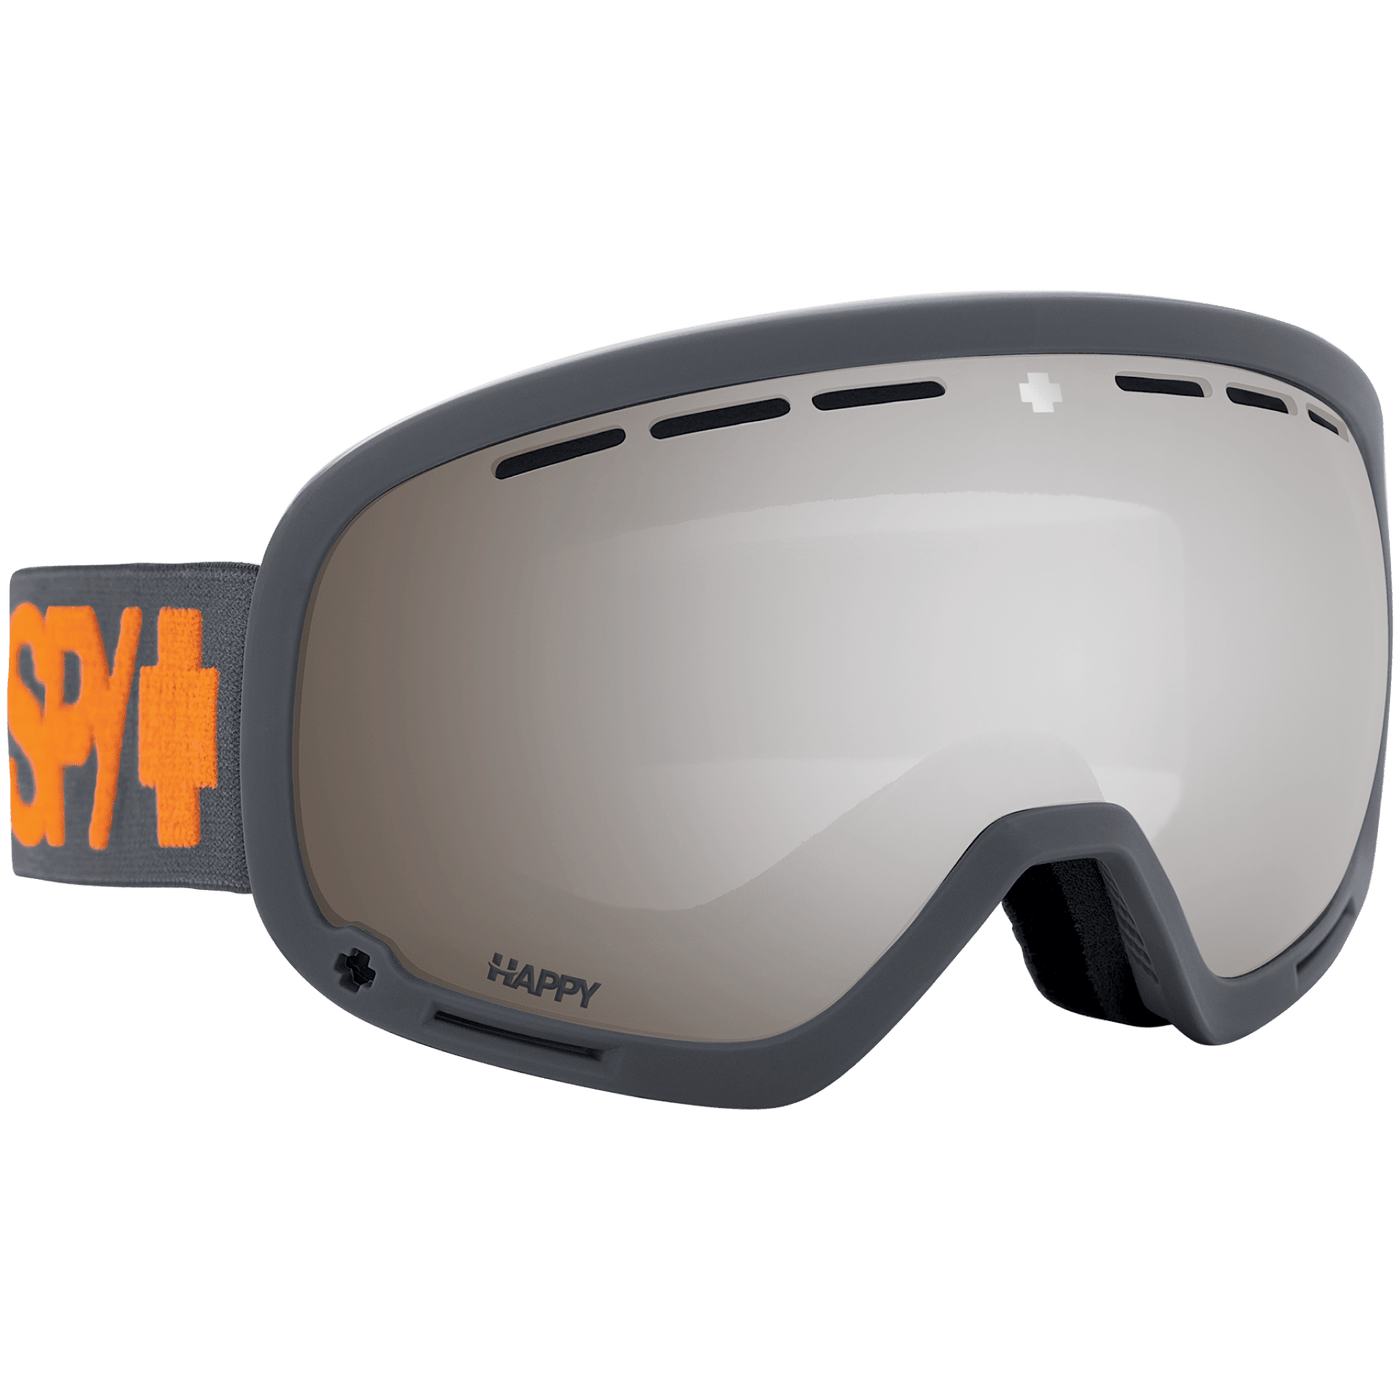 SPY Marshall Snow Goggles - Matte Gray 8Lines Shop - Fast Shipping